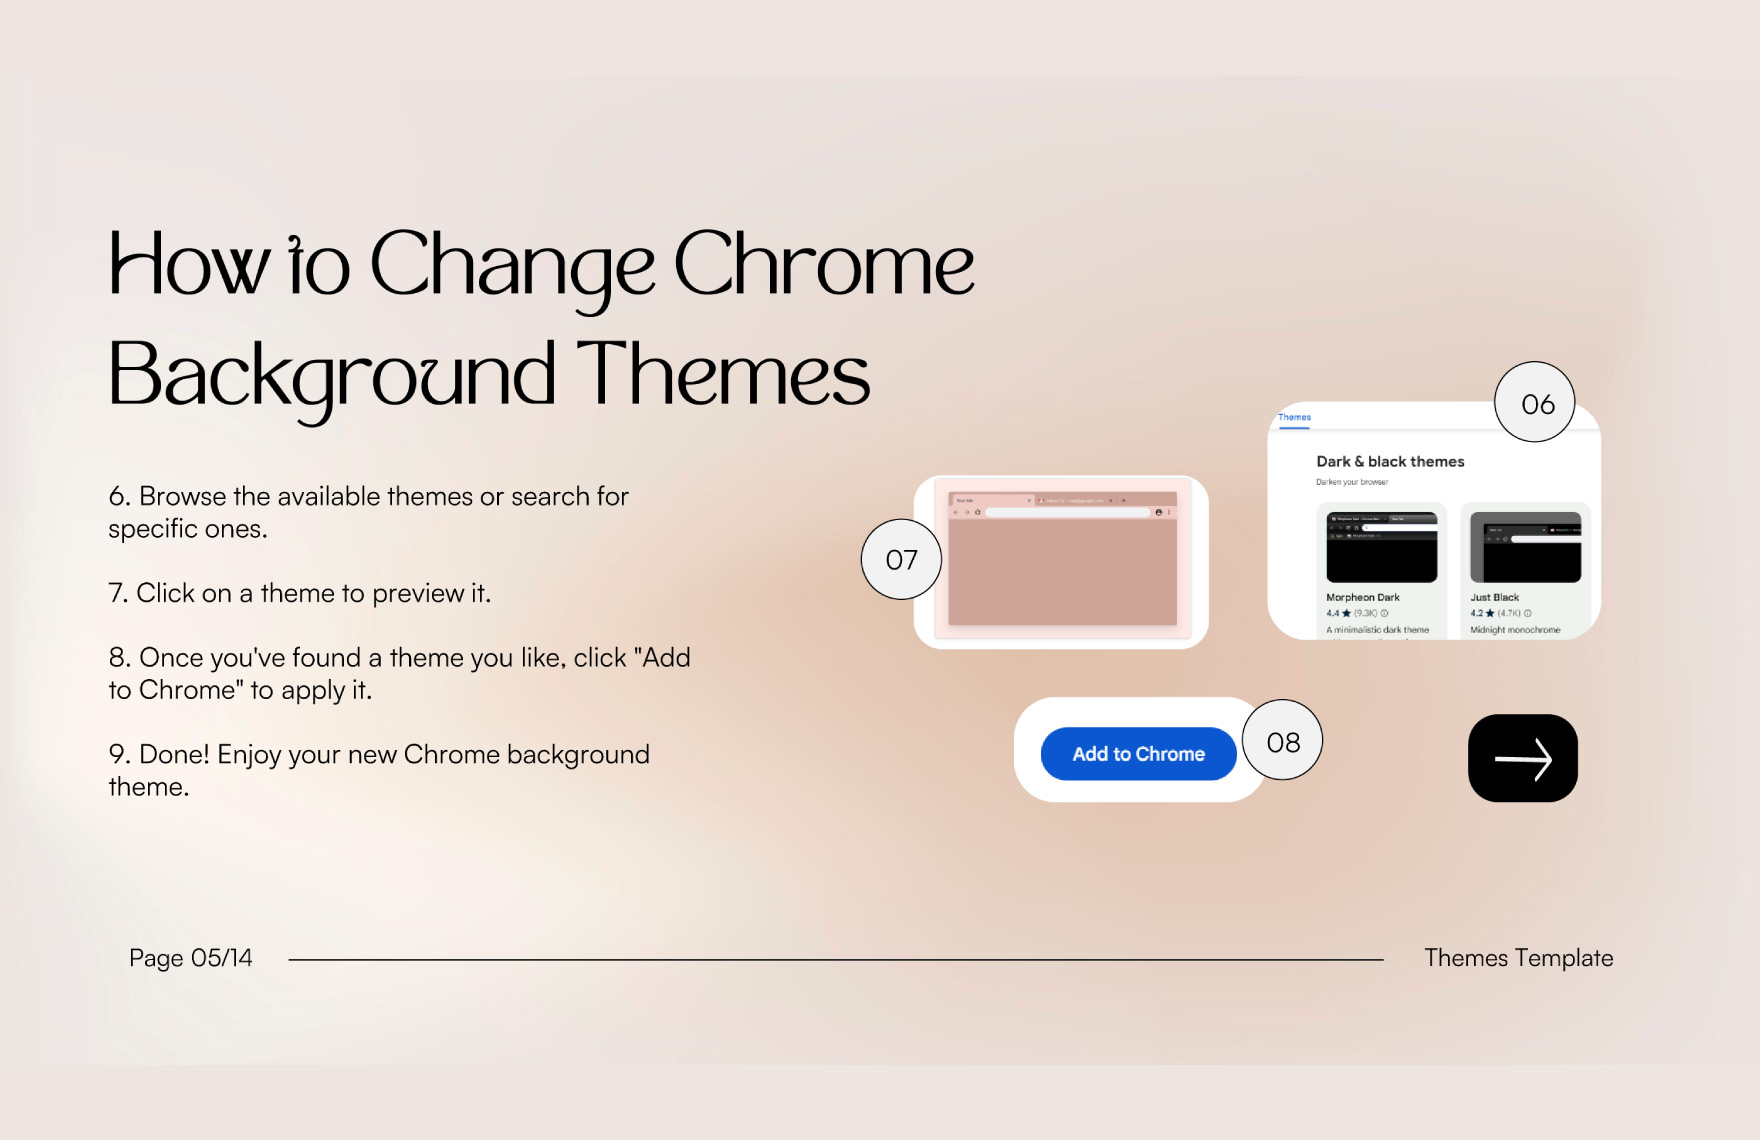 Change Background Chrome Themes Template